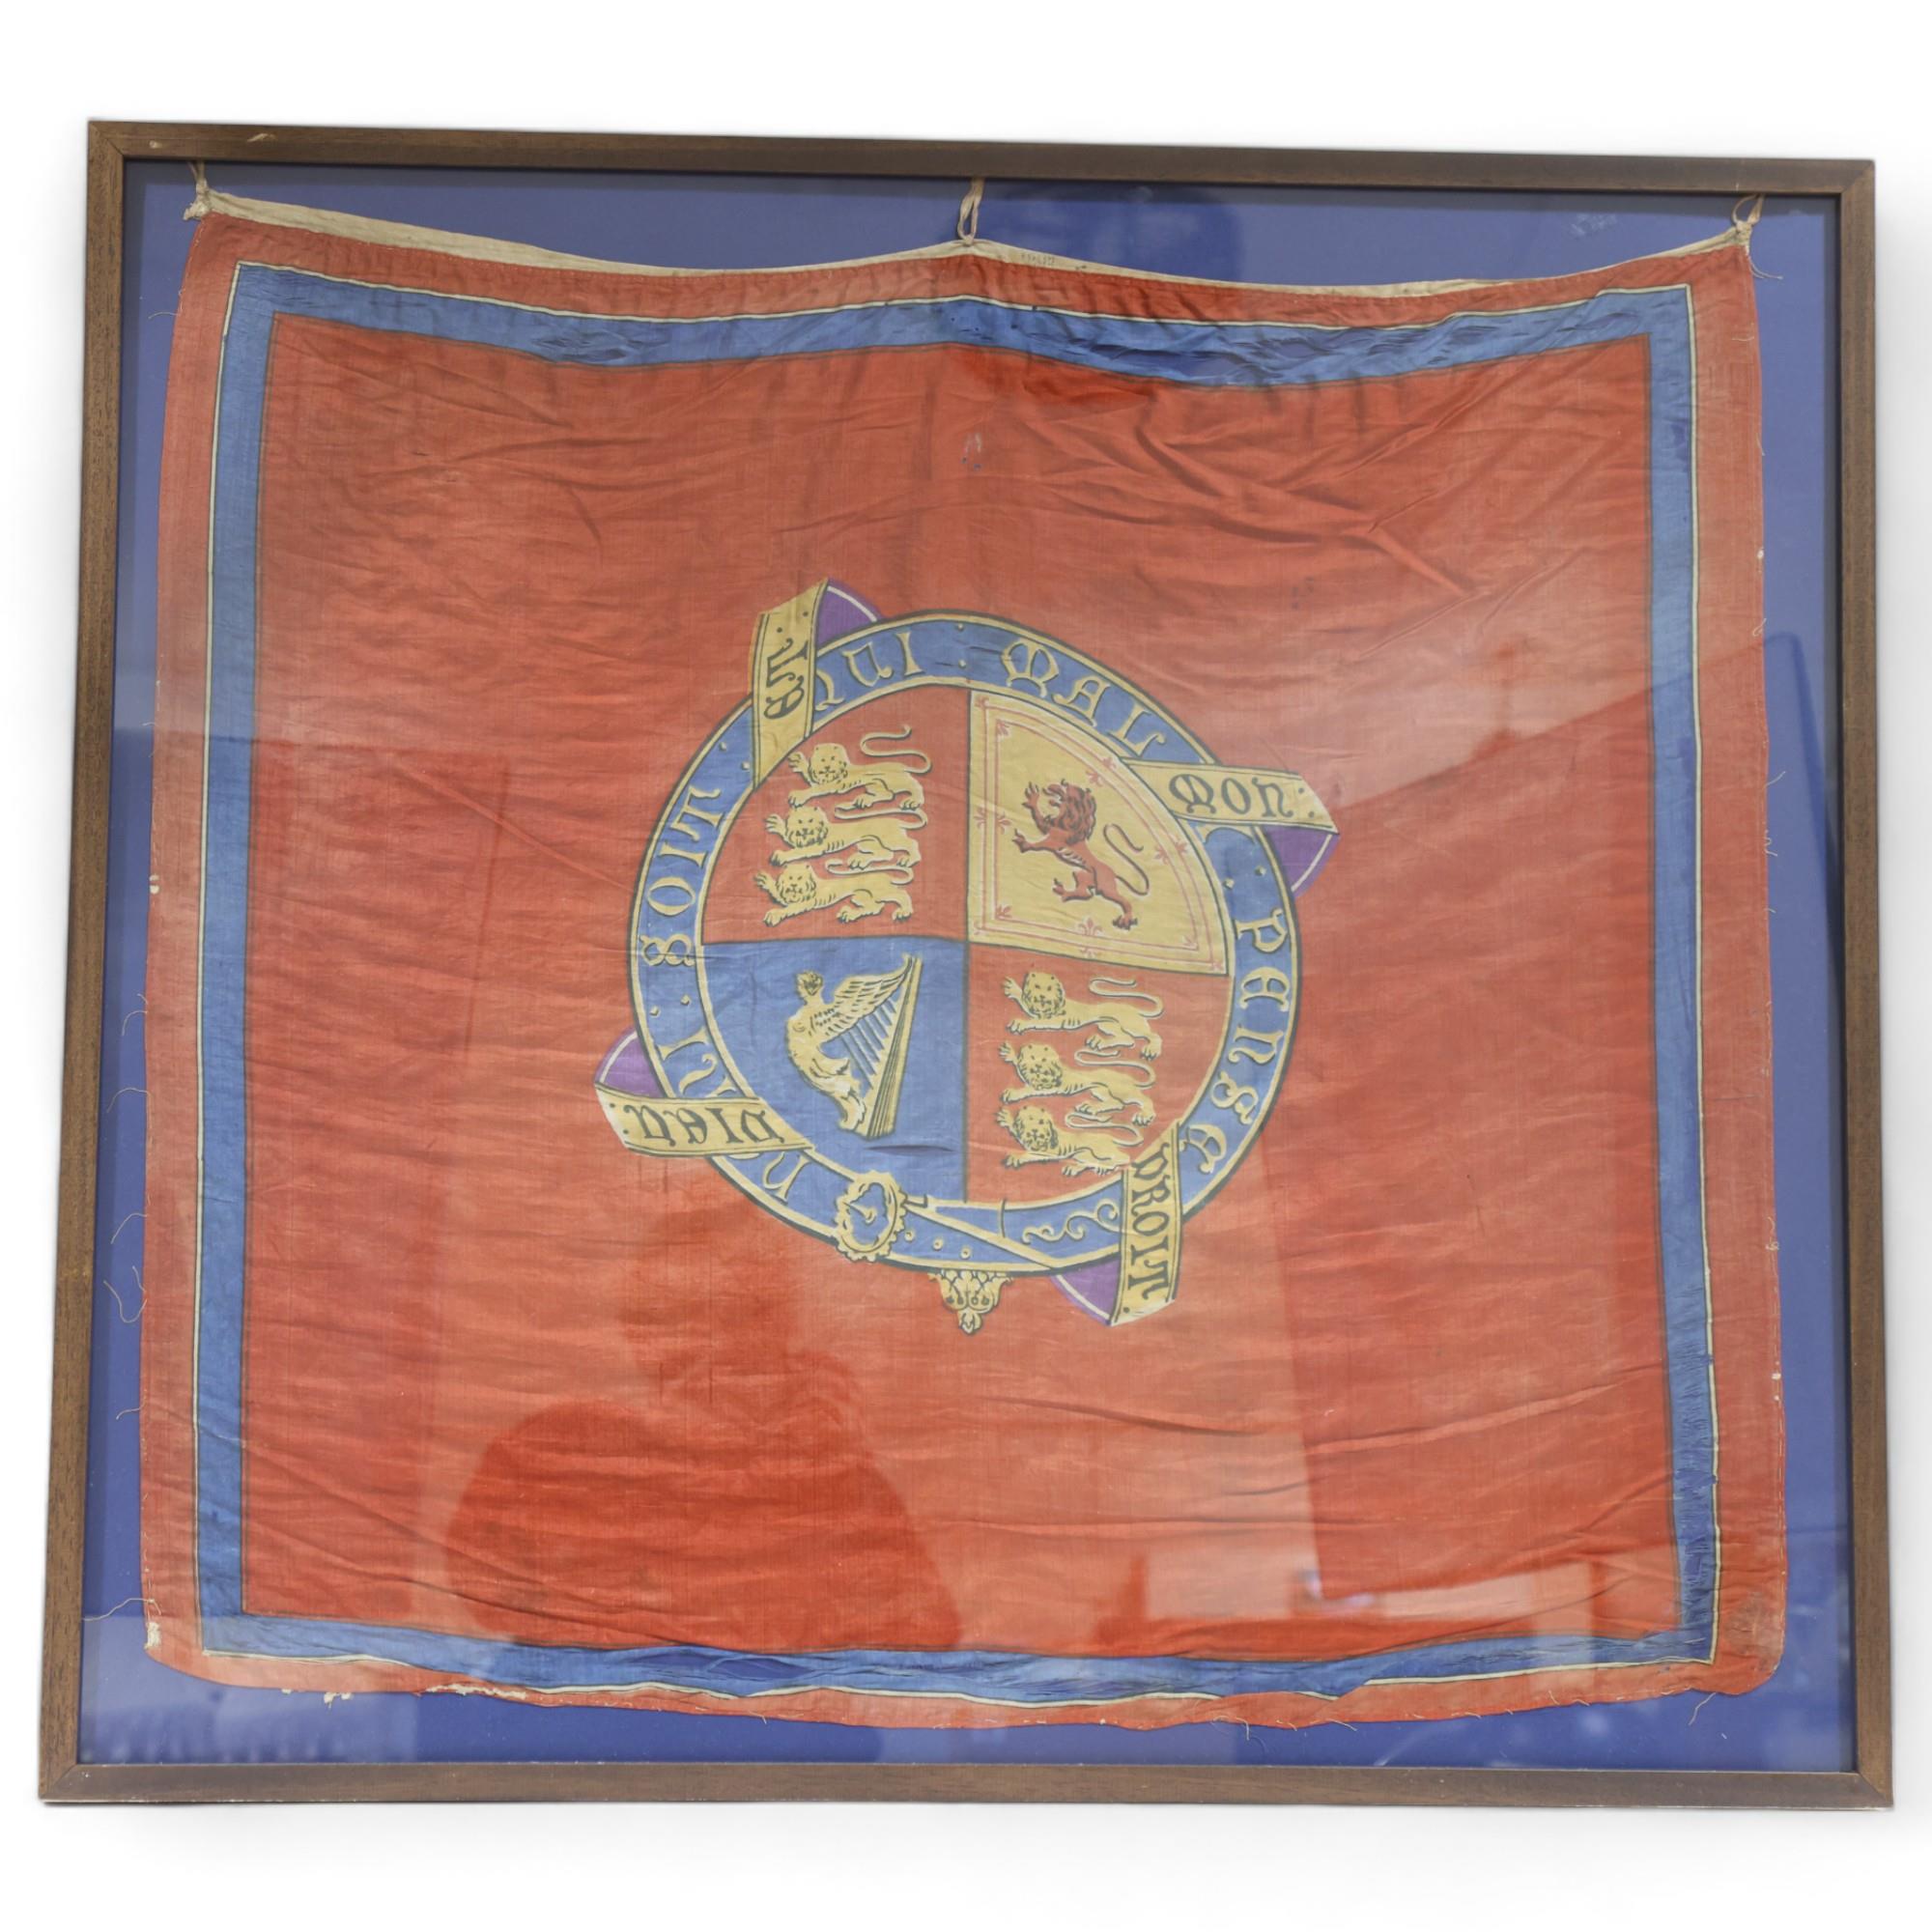 A 19th century military Standard, in modern frame, overall frame dimensions 77cm x 77cm